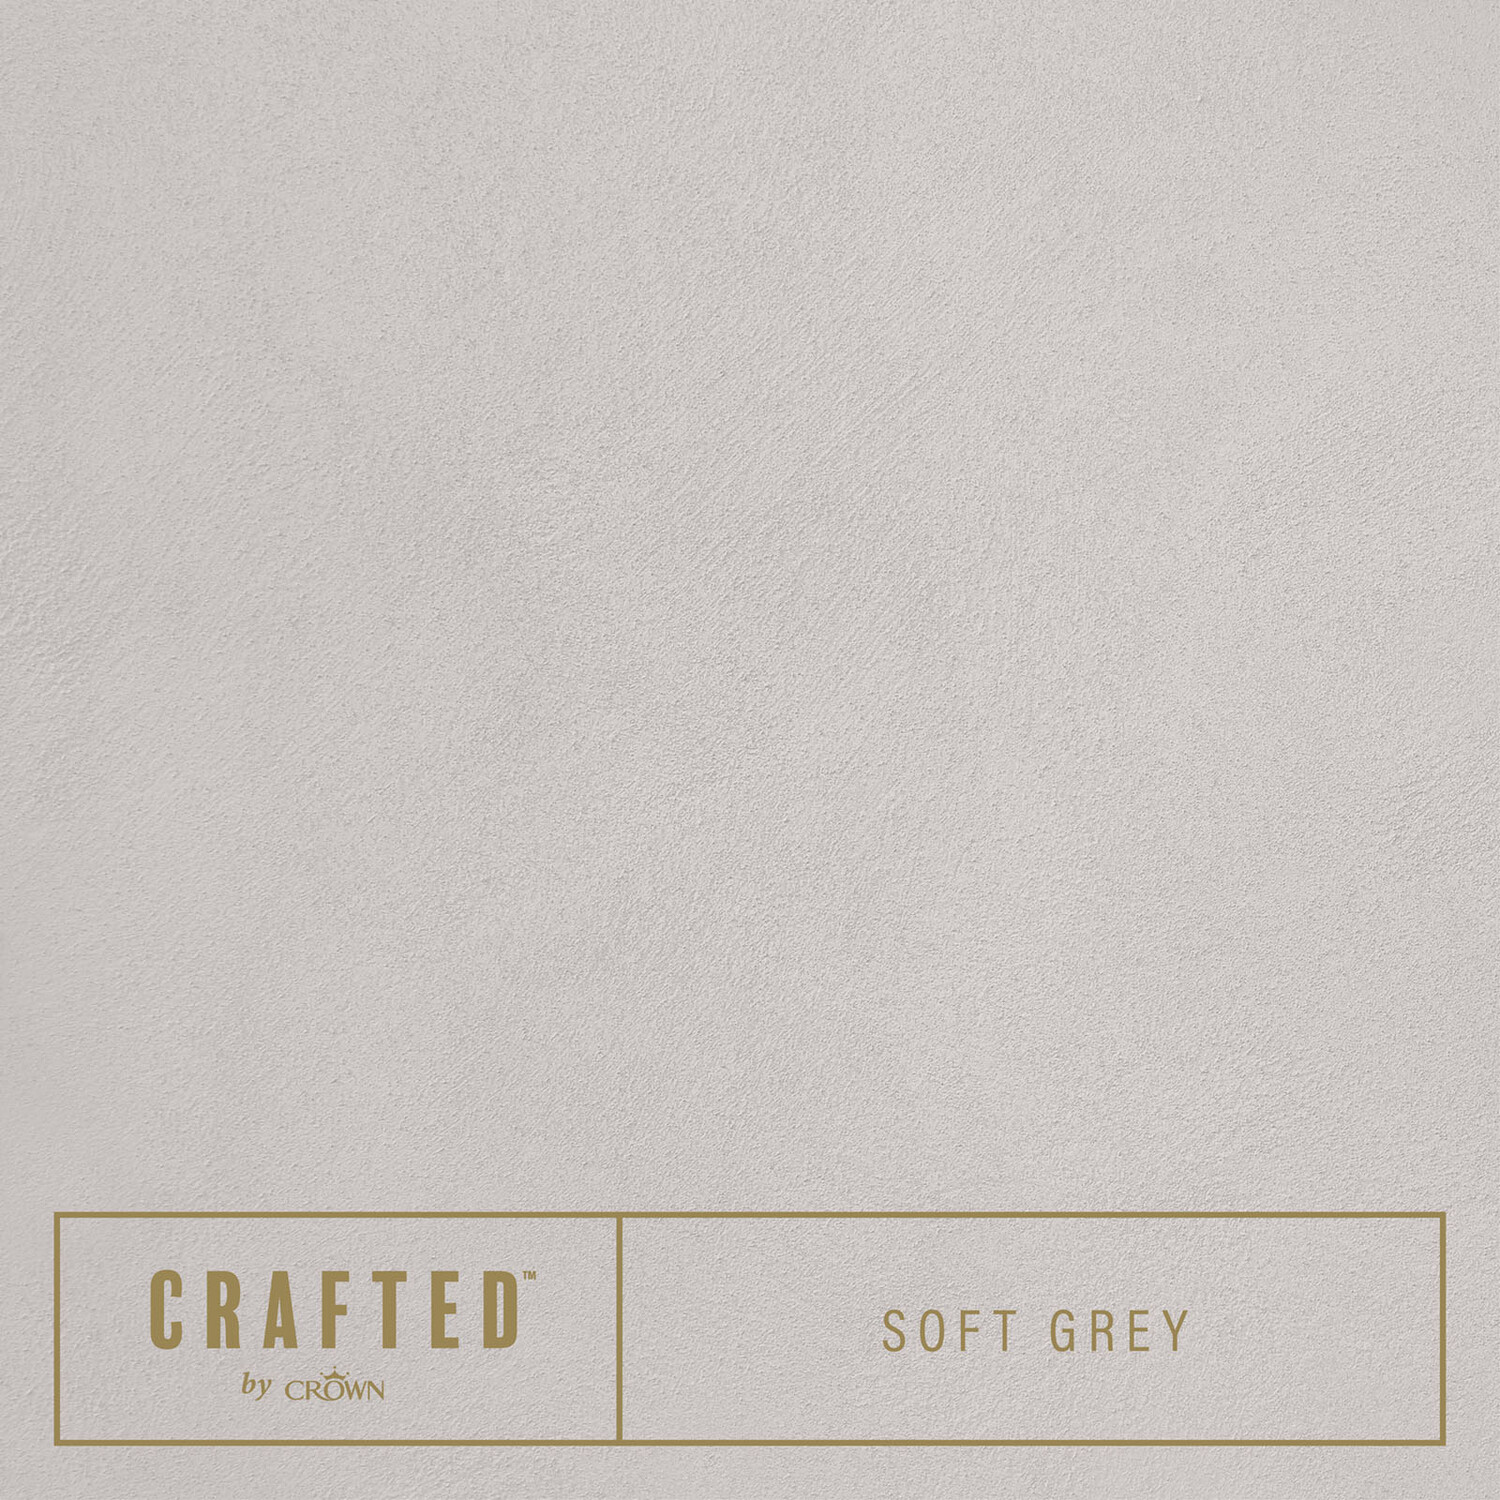 Crown Crafted Walls Soft Grey Suede Textured Finish Paint 2.5L Image 4